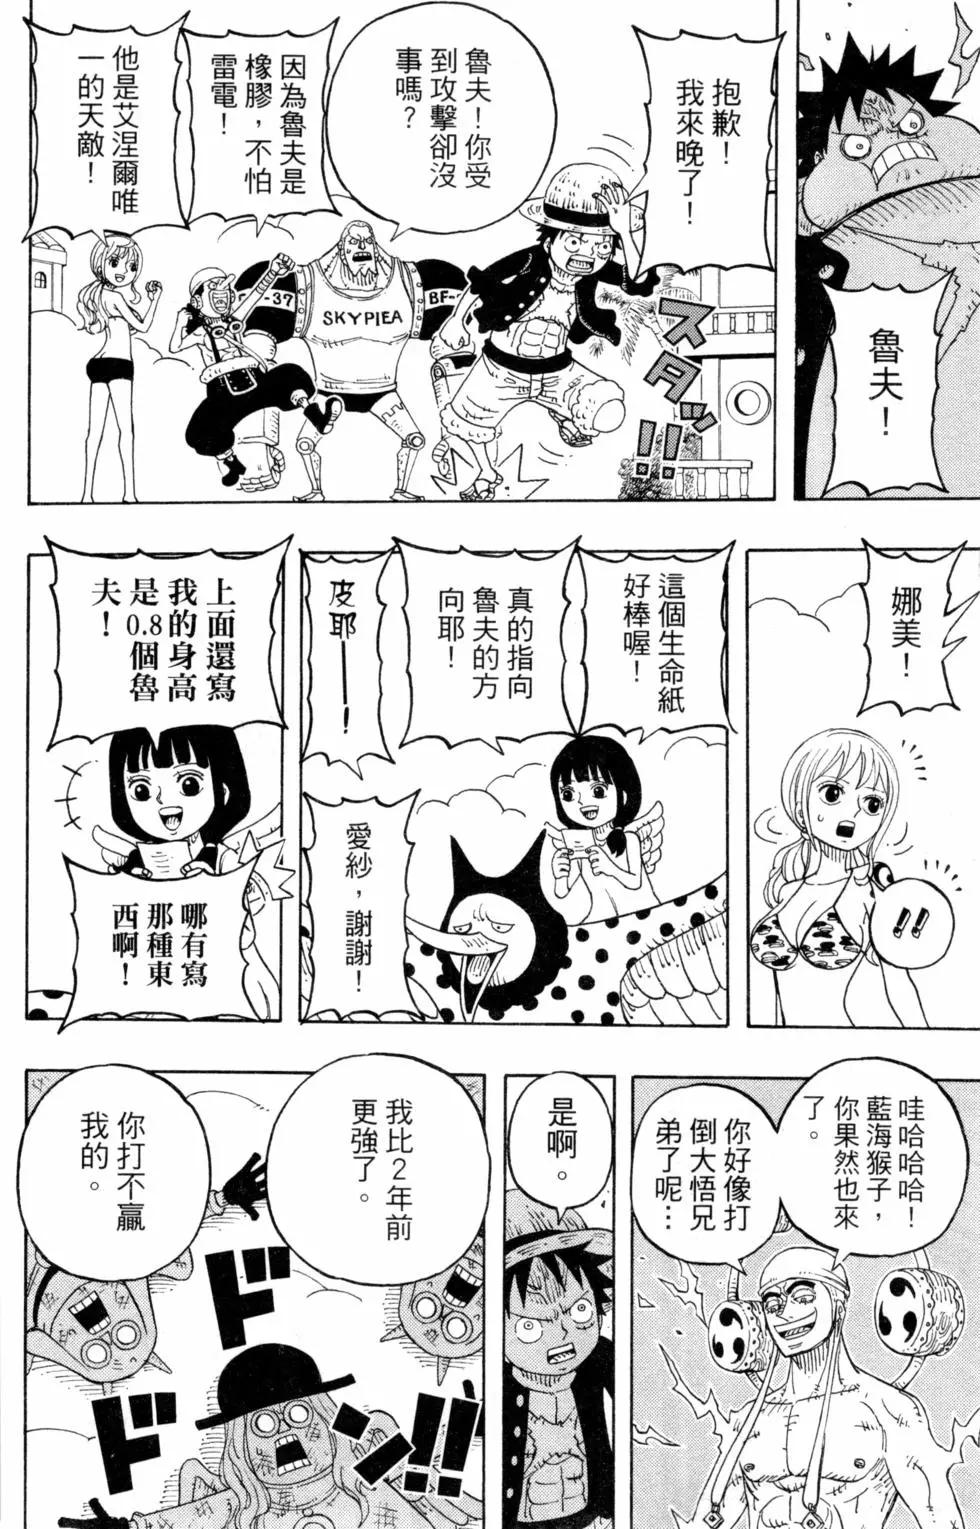 One piece party - 第06卷(2/4) - 1